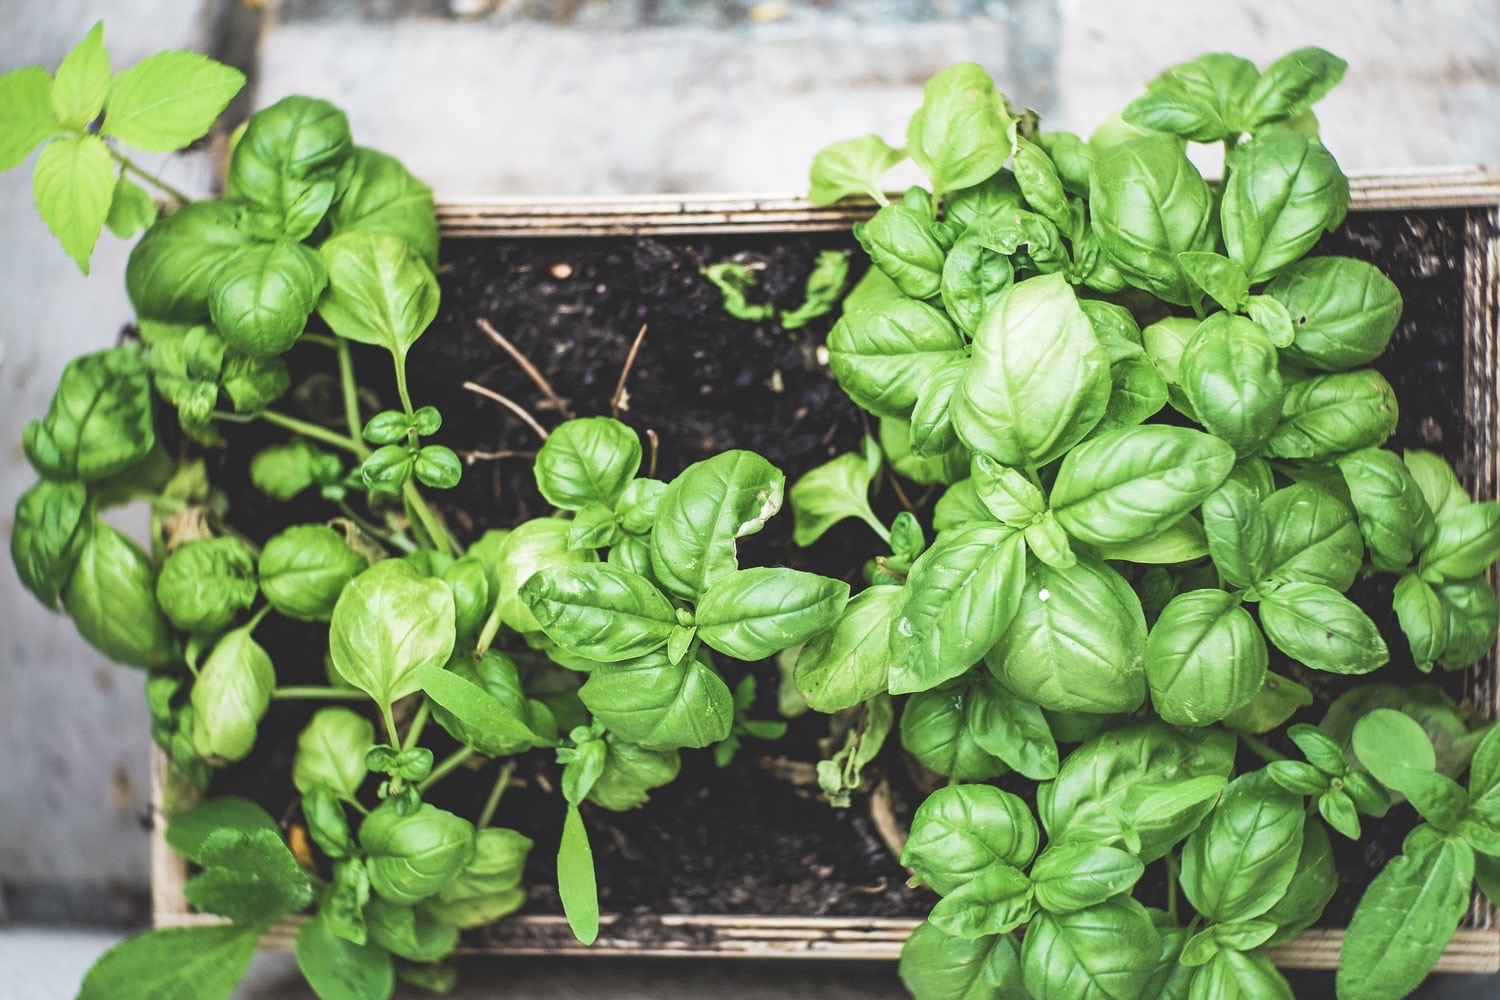 Repel mosquitoes and houseflies with this wonderful herb. Maybe even put some plants by your backdoor to discourage them from getting inside, and have easy access to basil when you want to cook with it.